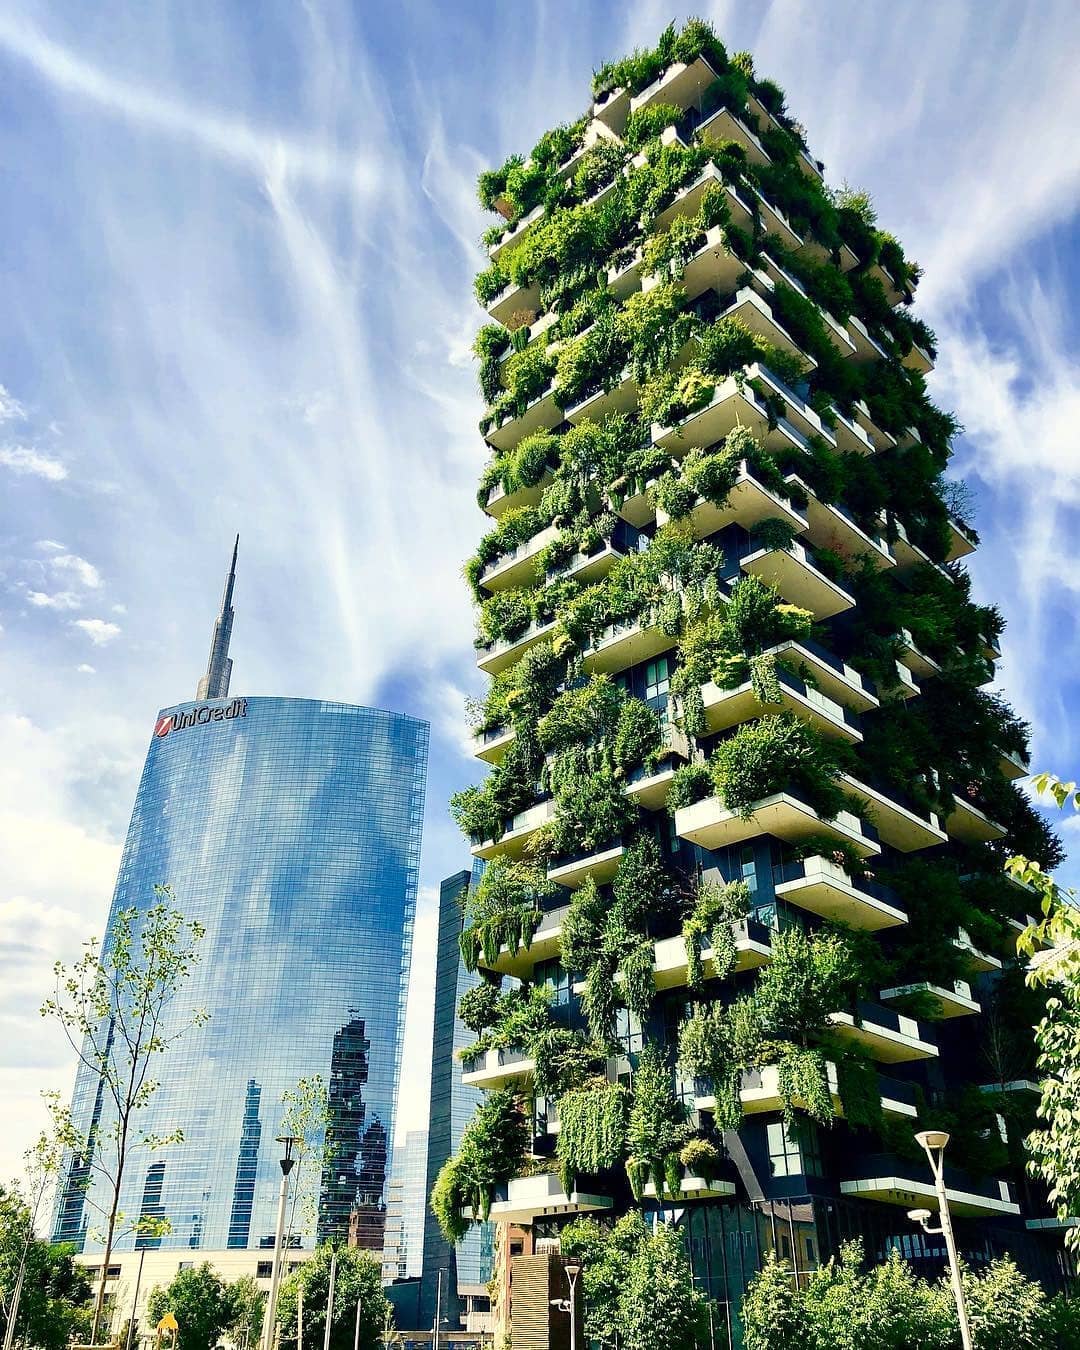 Opened on 2014, October 14th, the experimental building designed by Stefano Boeri is today considered a successful experiment. It represents a model for urban regenerative development which introduces living nature not only as decorative element but as a basic component of architecture and which can improve the role of cities on a global action on Urban Forestry.